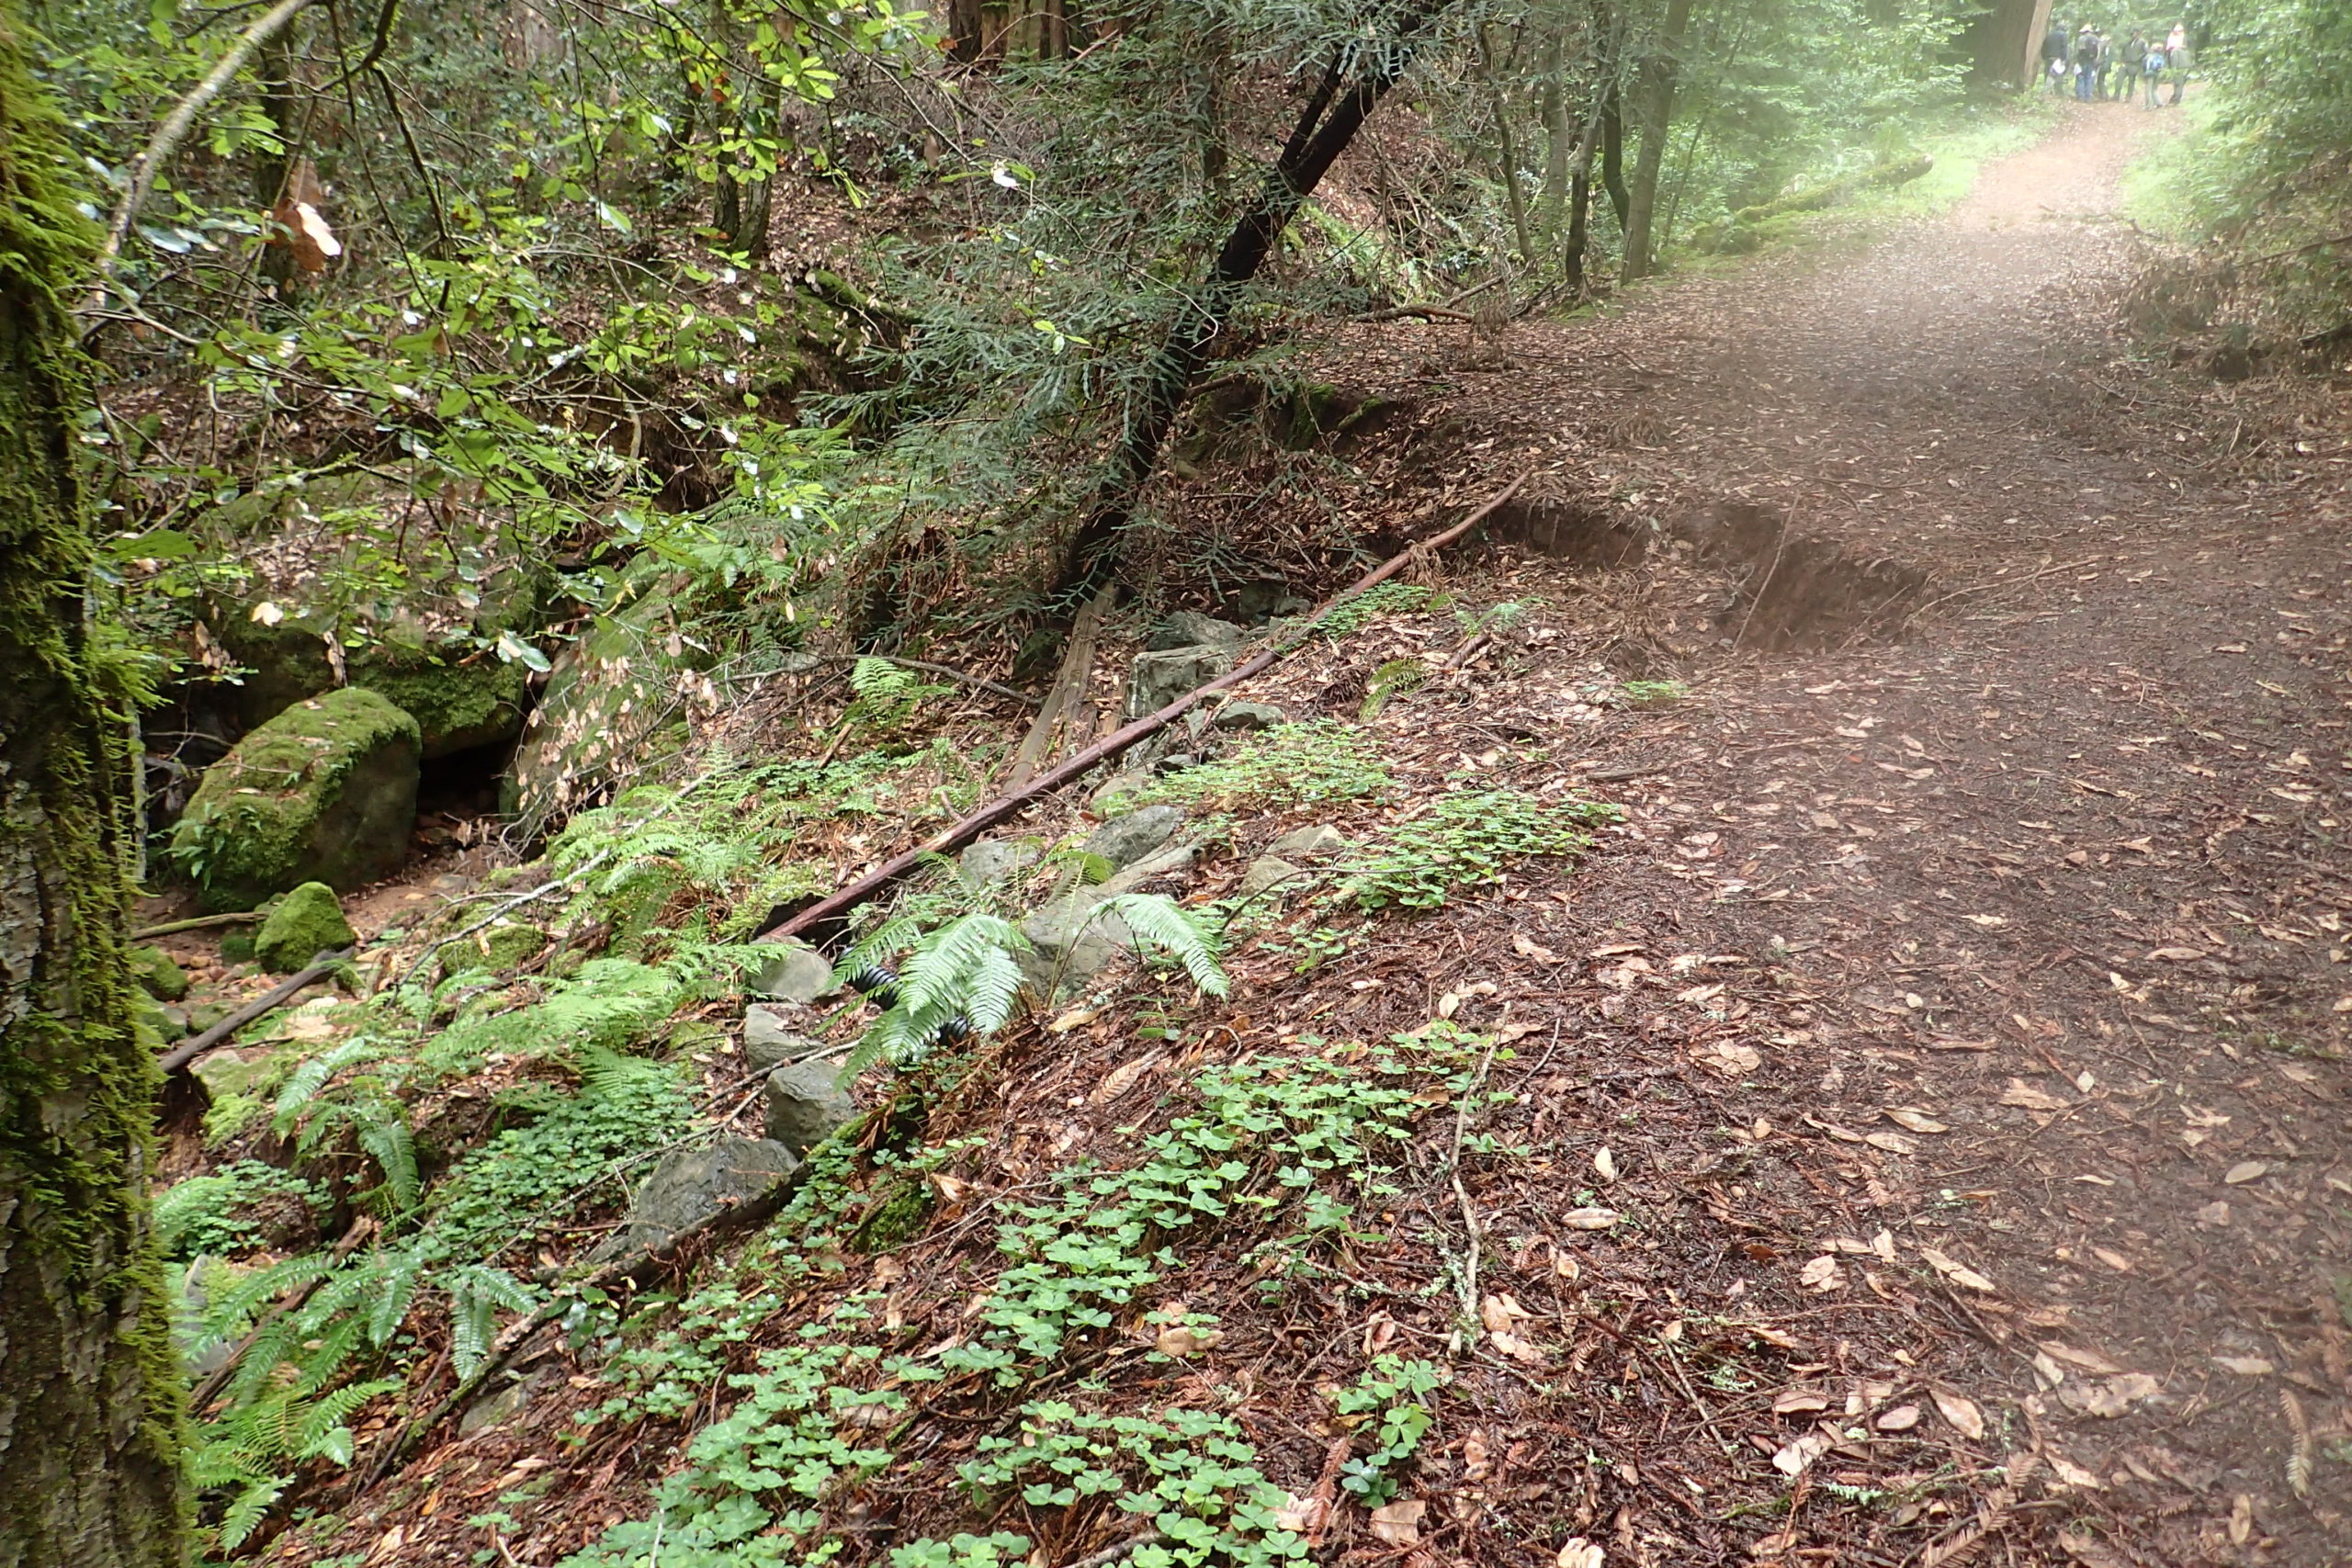  In a forested area, a dirt road has partially slid into the deep ditch, leaving a ragged edge.  